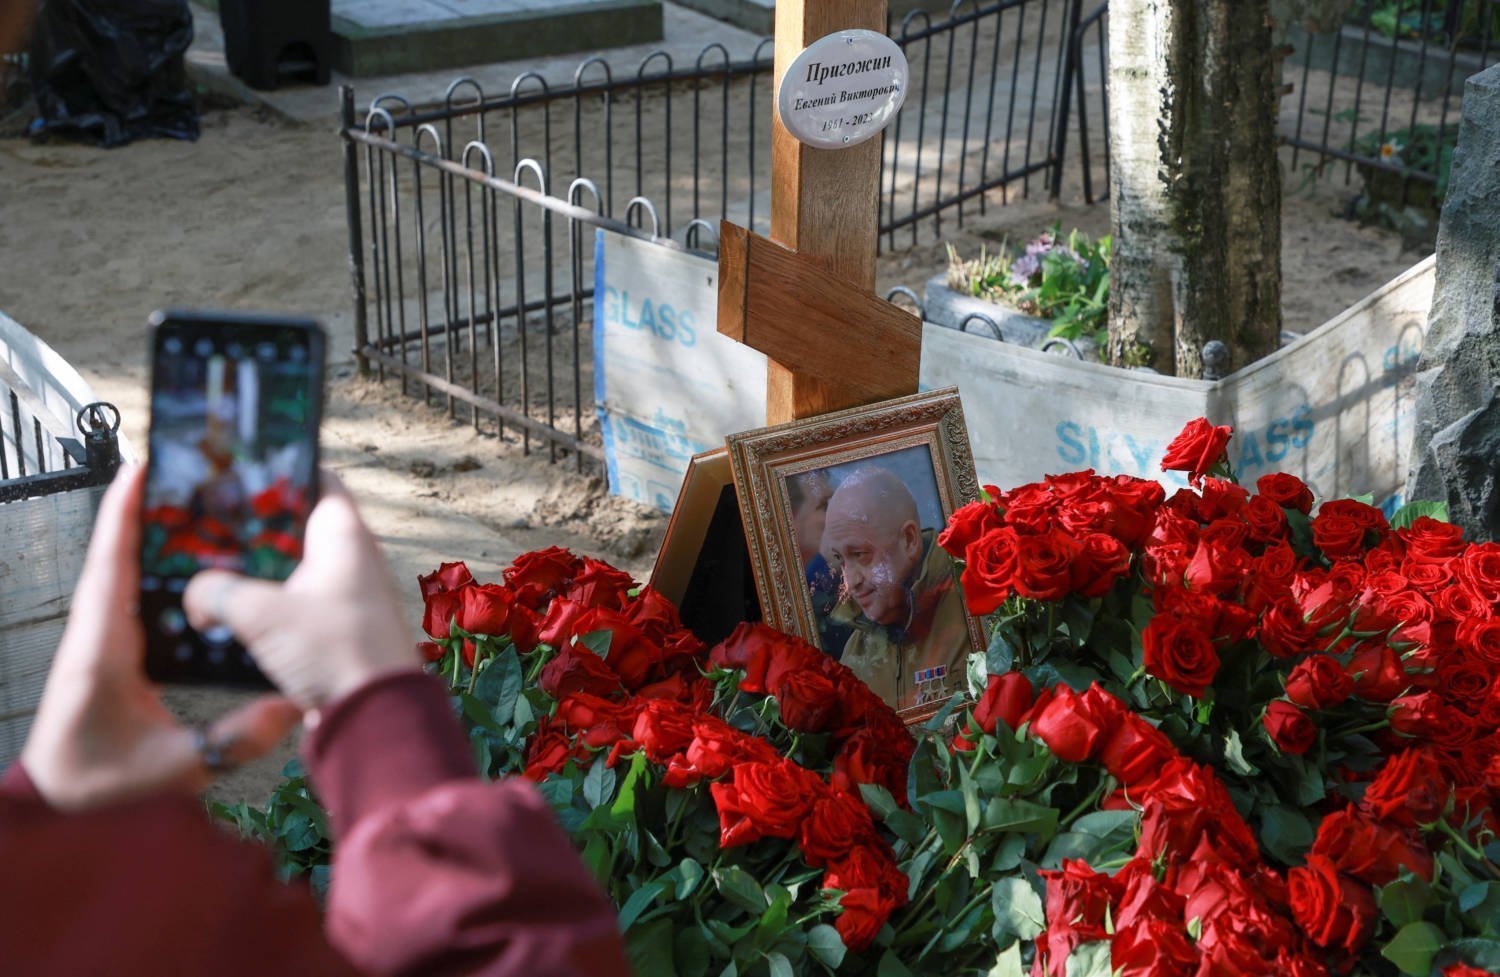 A View Shows The Grave Of Russian Mercenary Chief Yevgeny Prigozhin In St Petersburg